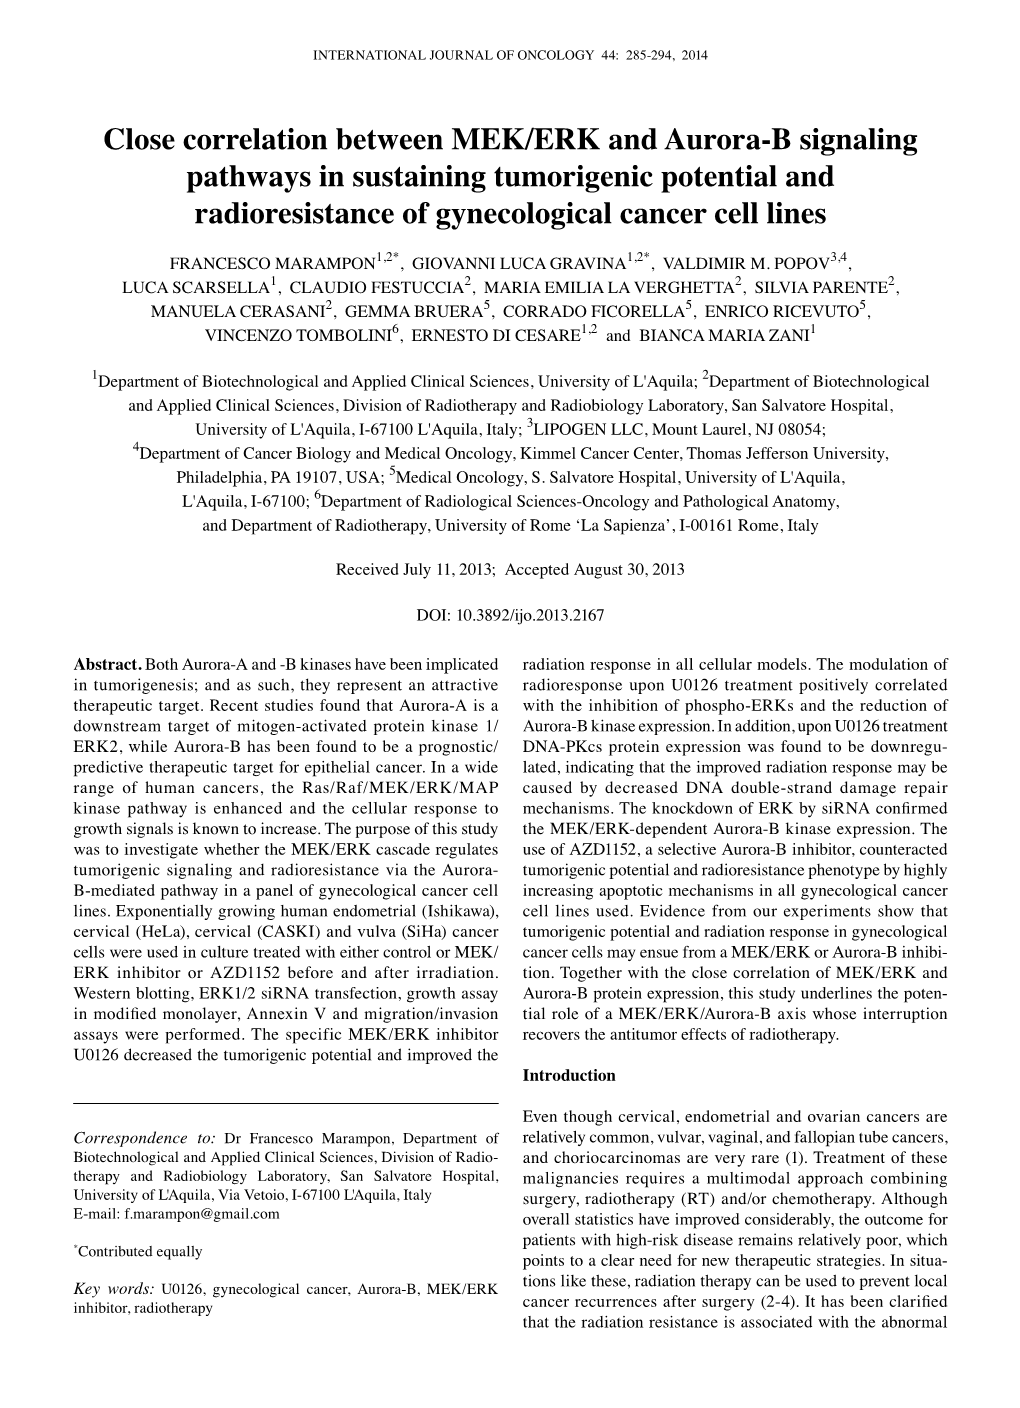 Close Correlation Between MEK/ERK and Aurora-B Signaling Pathways in Sustaining Tumorigenic Potential and Radioresistance of Gynecological Cancer Cell Lines